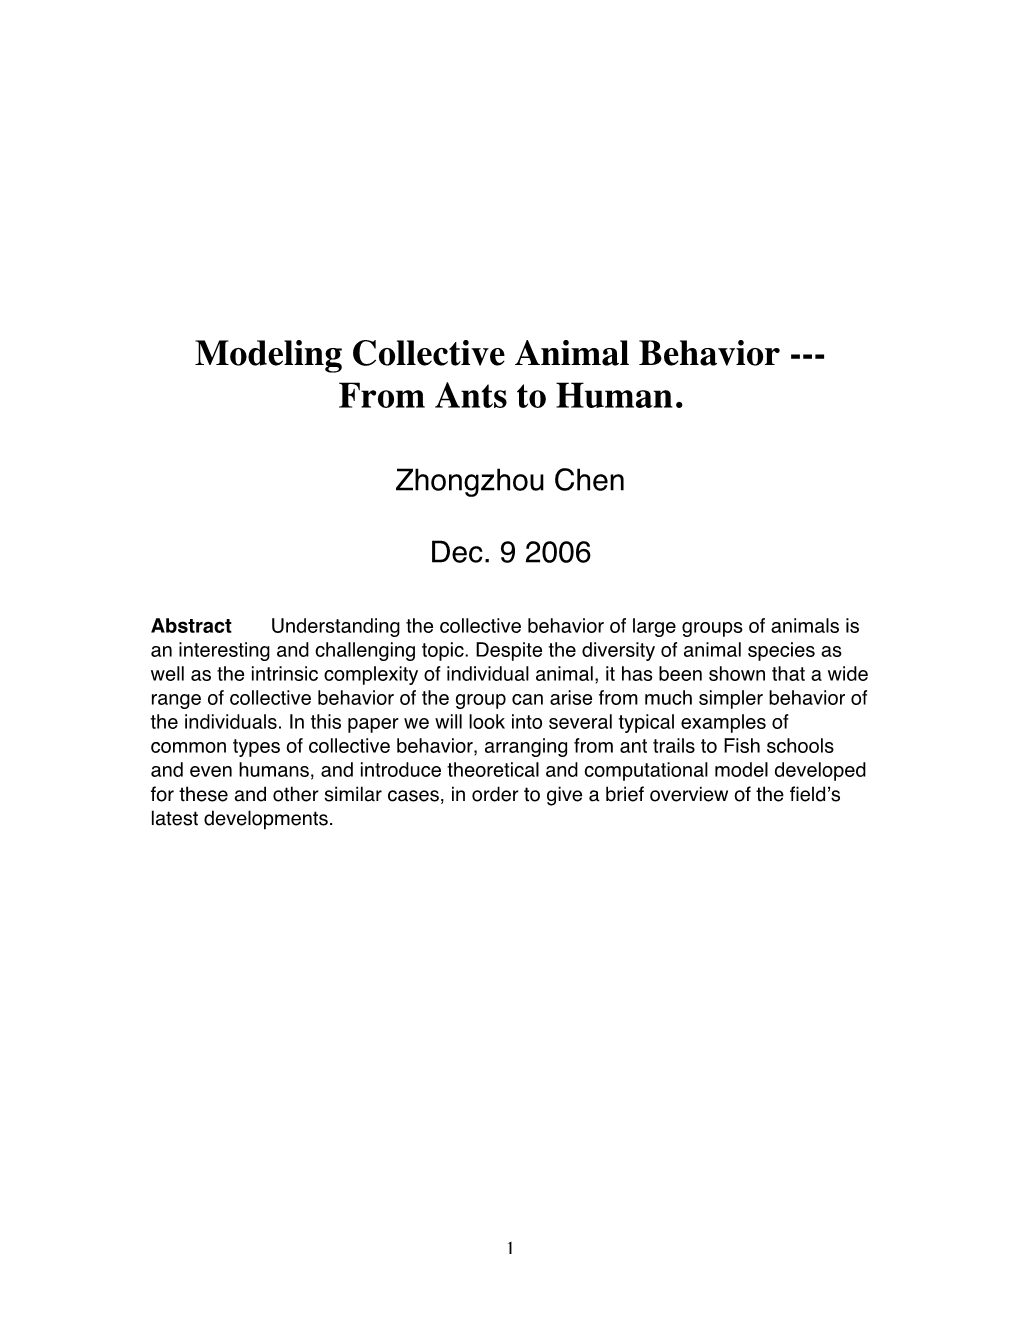 Modeling Collective Animal Behavior --- from Ants to Human